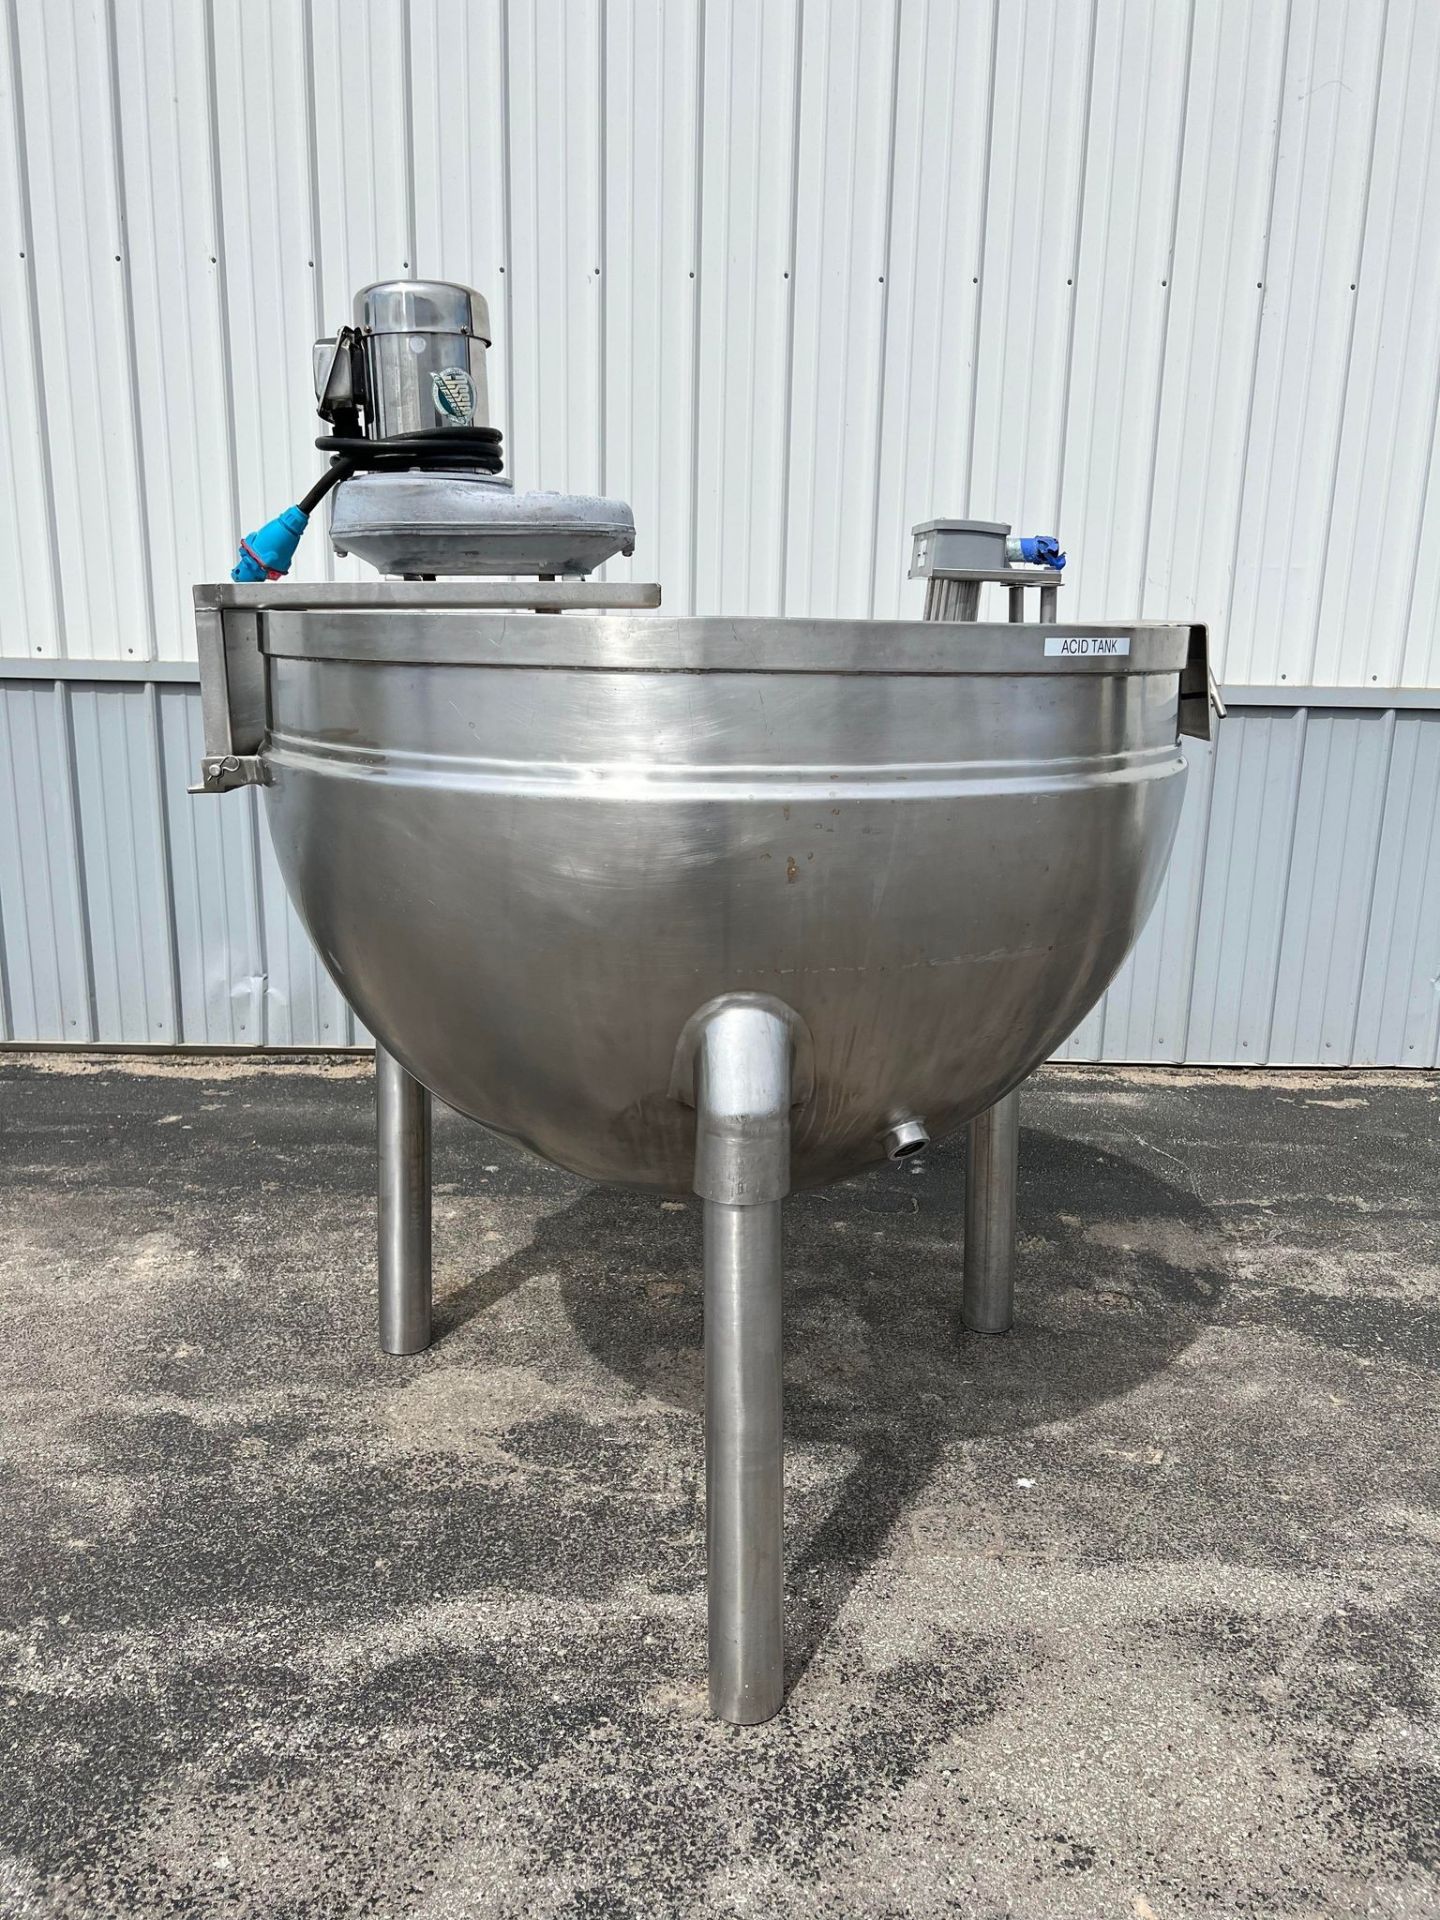 Aprox. 250 Gal. S/S Kettle with Agitator, 1/2 hp Motor, 230/460 V, 1725 RPM, 3 Phase; Paddle,